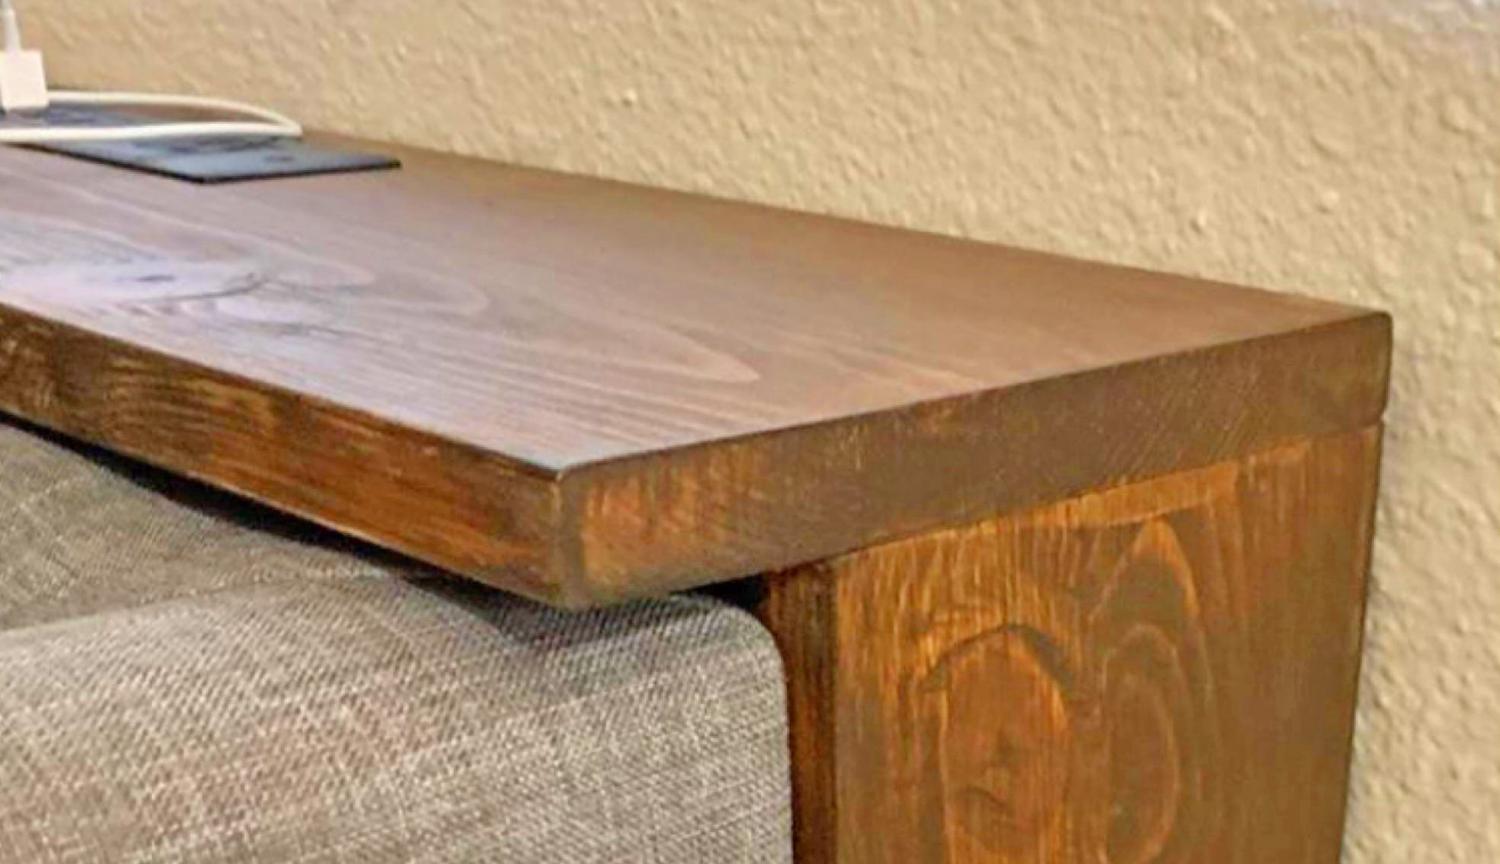 Behind The Couch Tables With Integrated Outlets - Powered console table with USB ports for charging phone